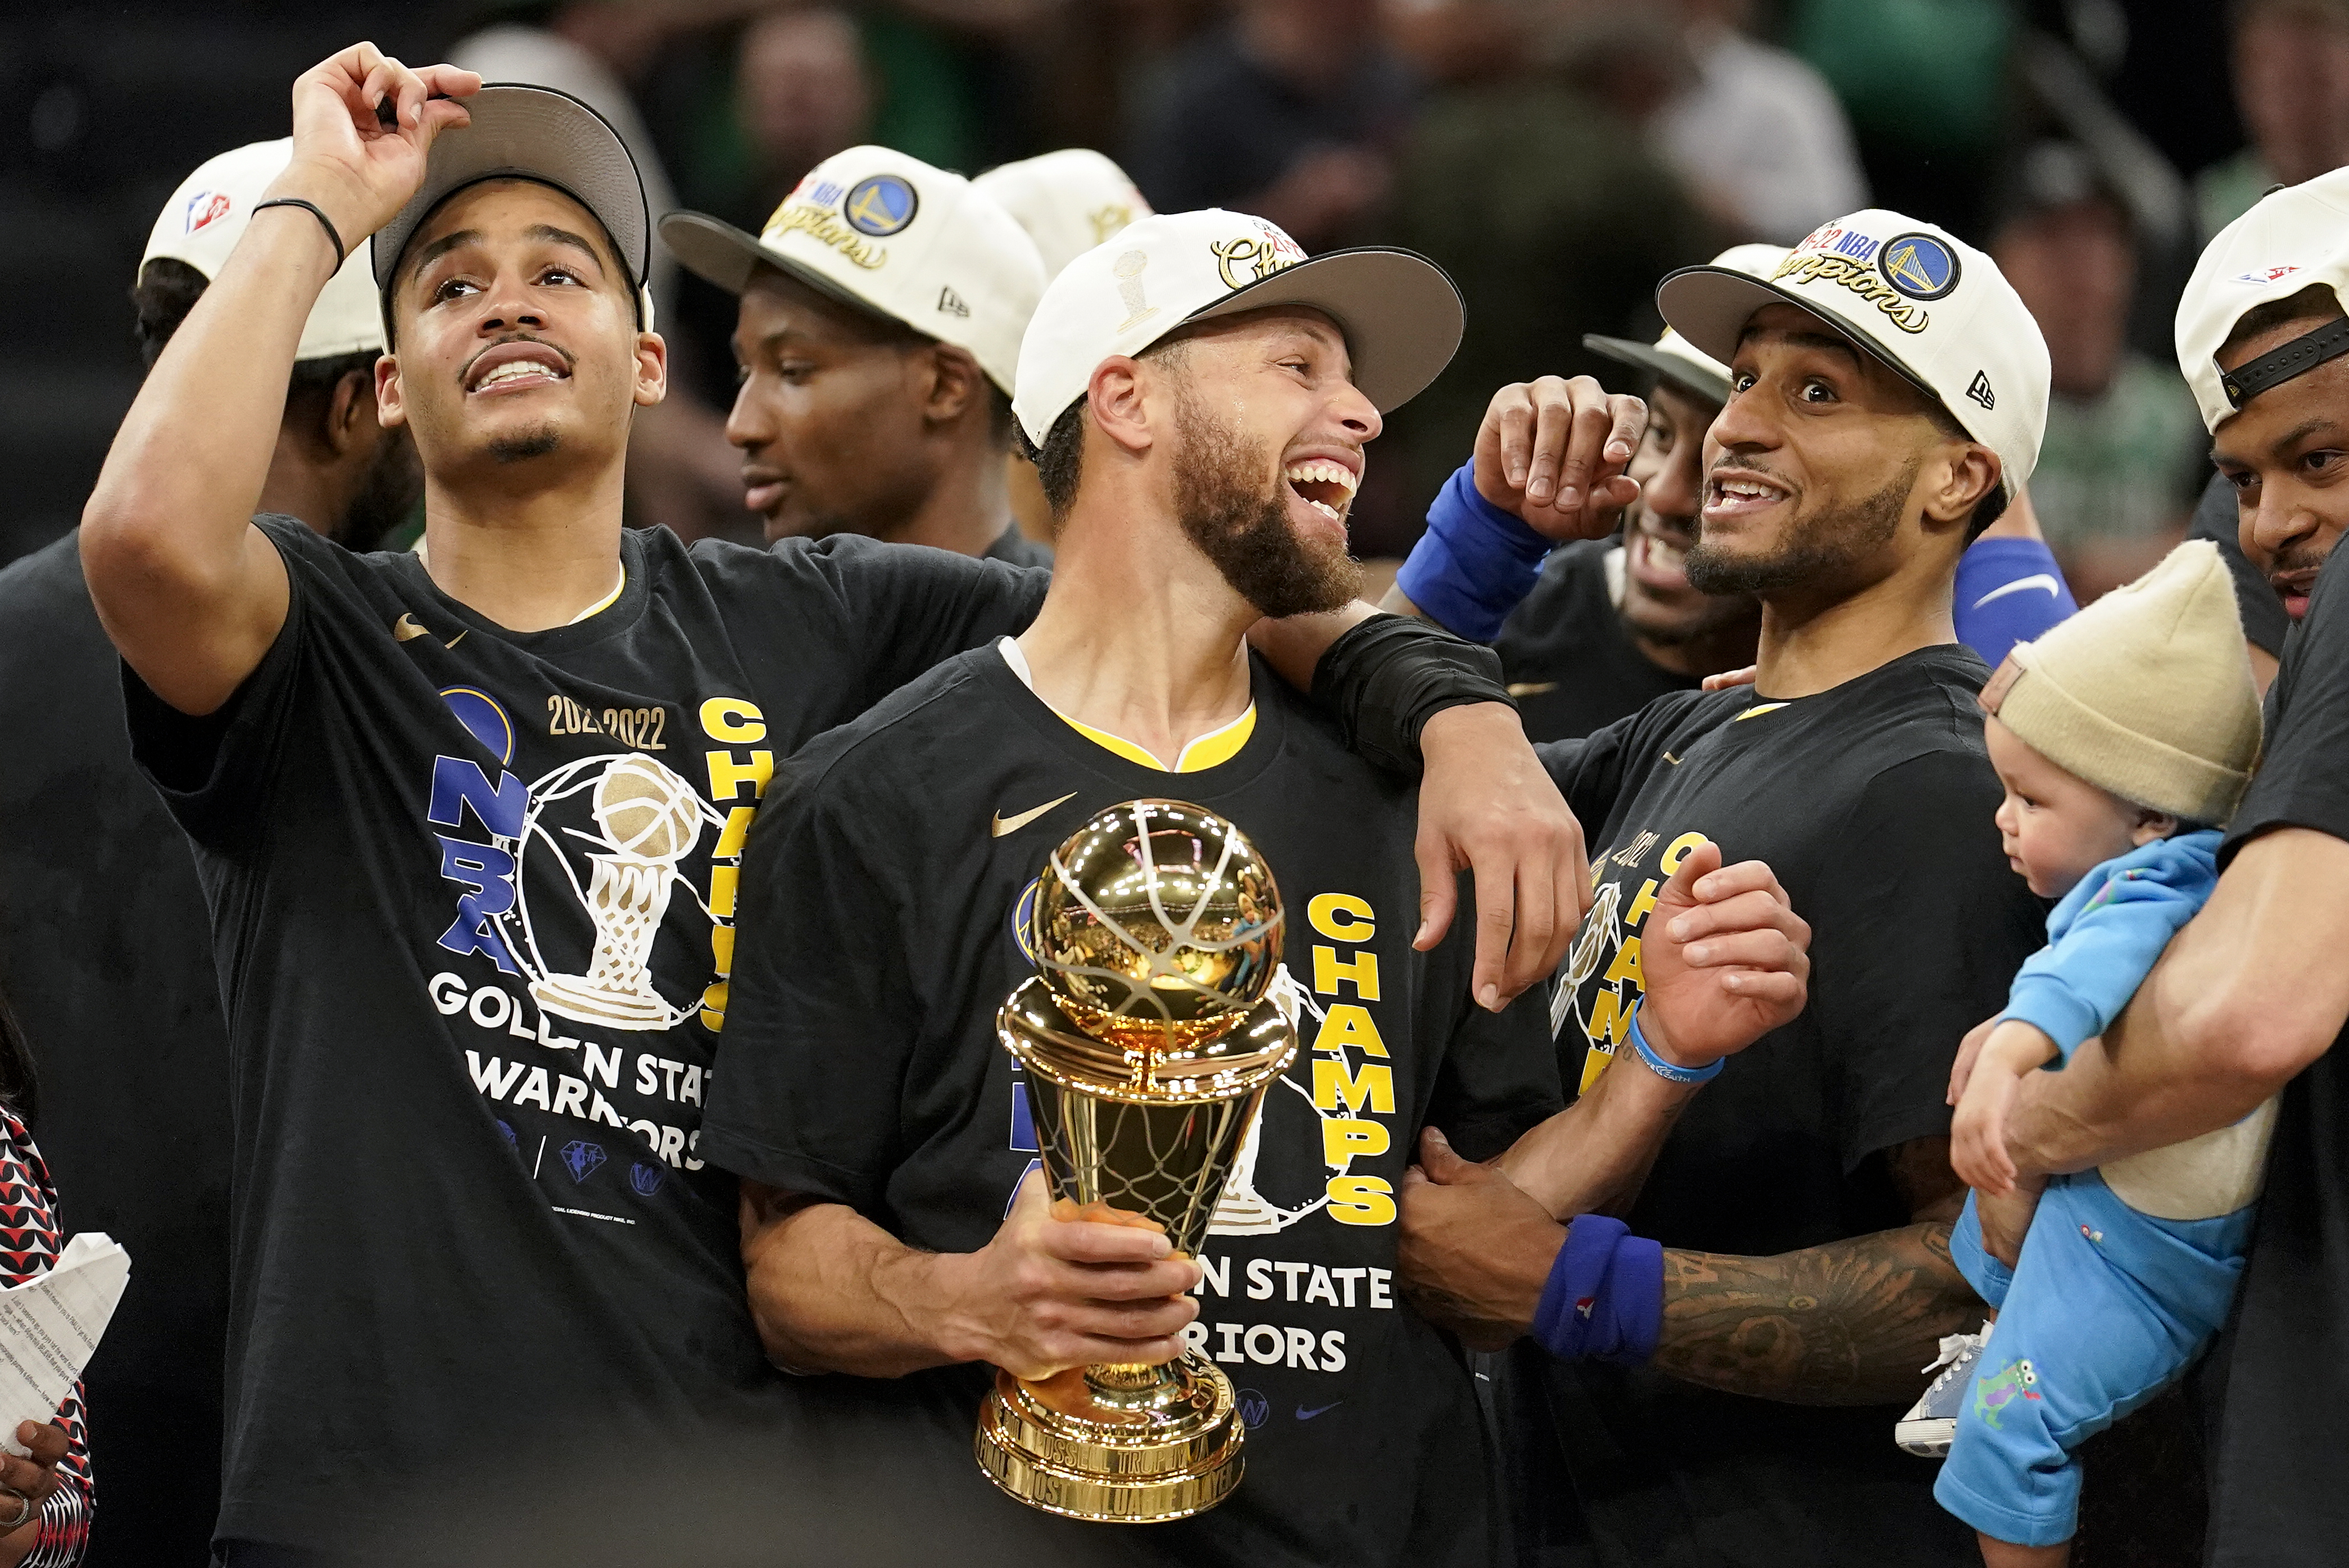 Warriors Beat Celtics 103-90 to Win 4th NBA Title in 8 Years